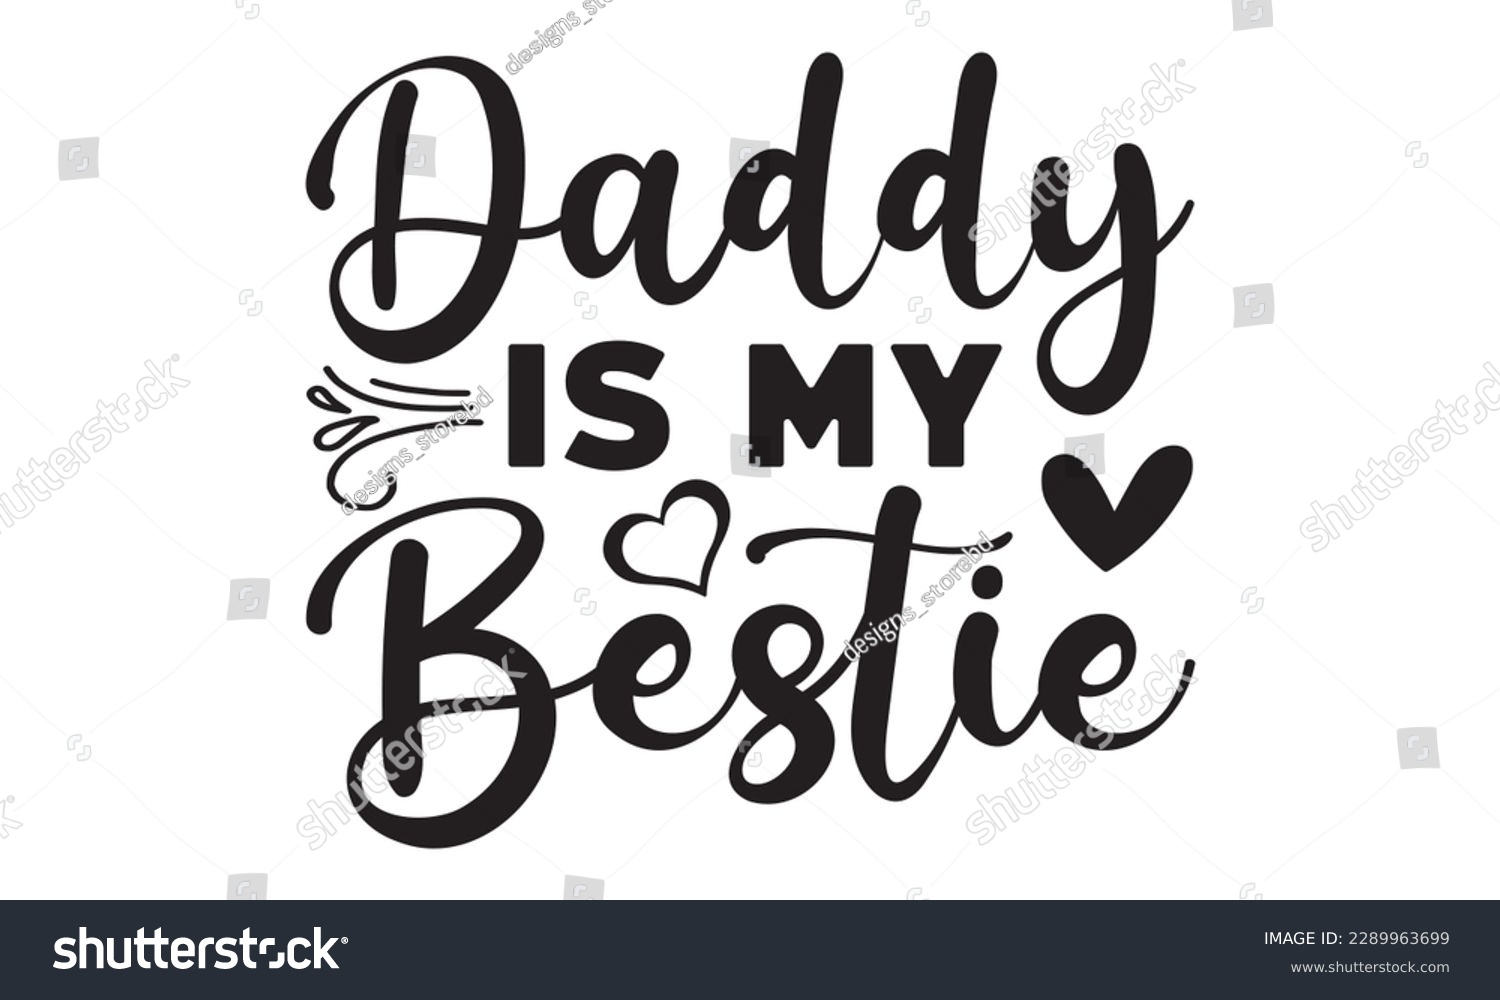 SVG of Daddy is my bestie svg, father's day svg Design, Hand drawn lettering phrase isolated on white background, llustration for prints on t-shirts and bags,  eps 10, Best Daddy svg,  dad svg design and Cut svg